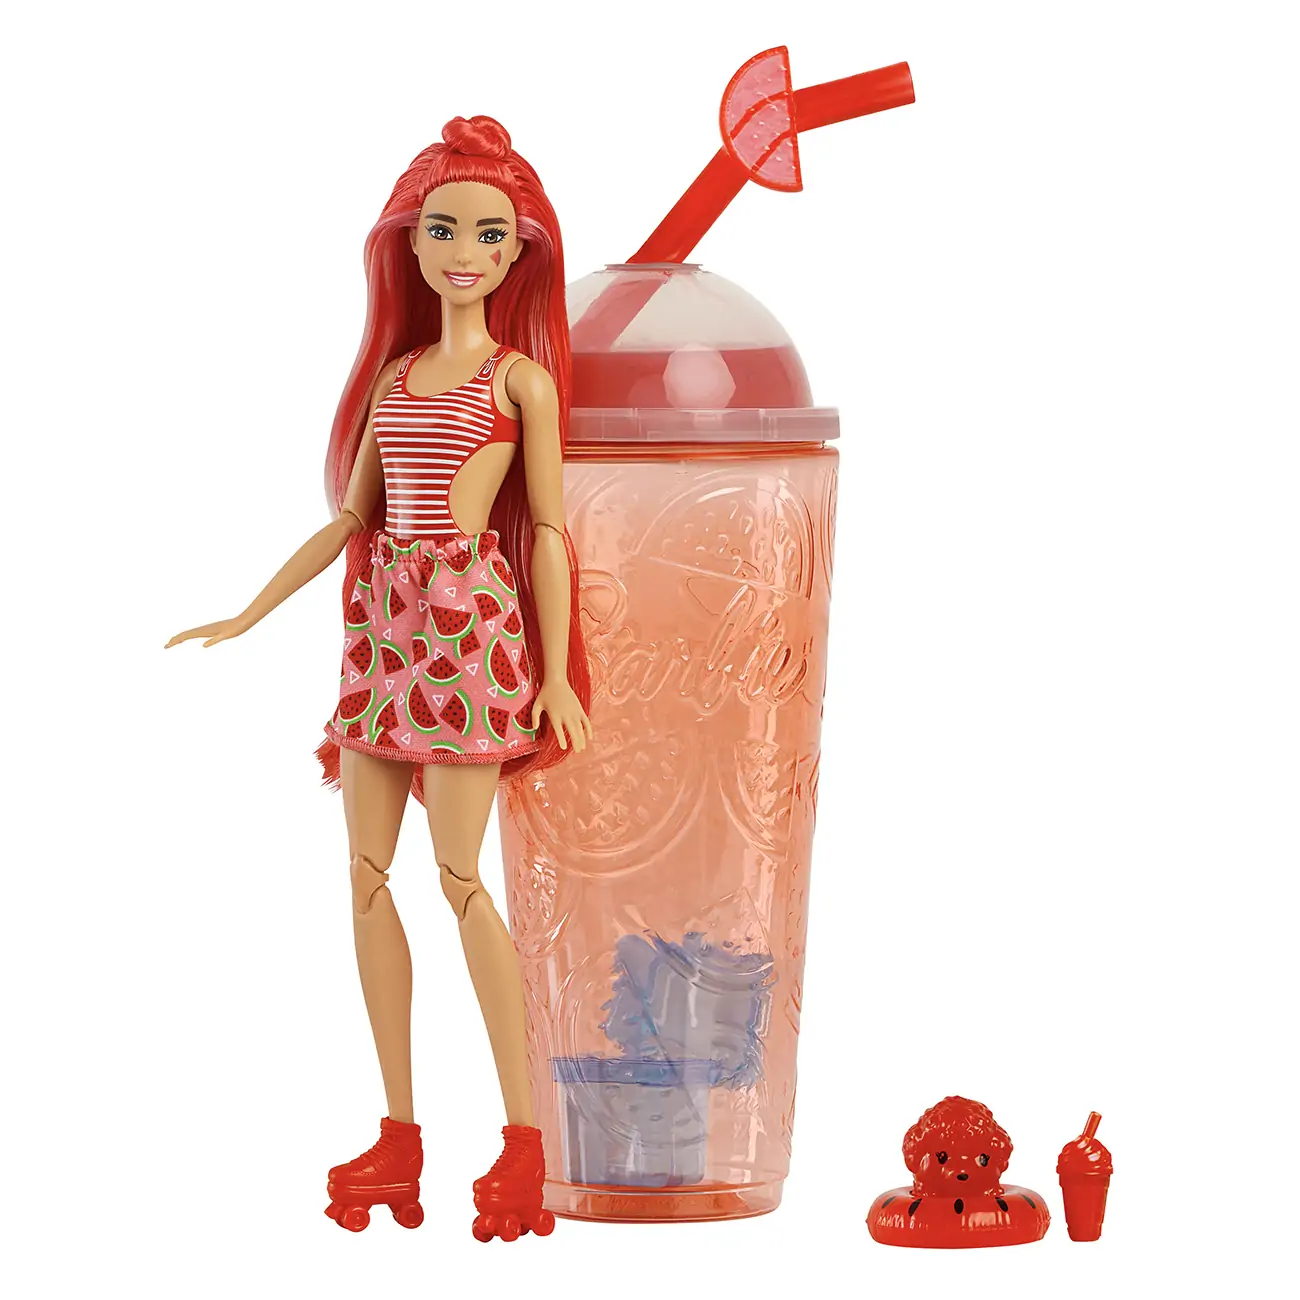 The 15 Best Barbie Toys To Gift in 2023